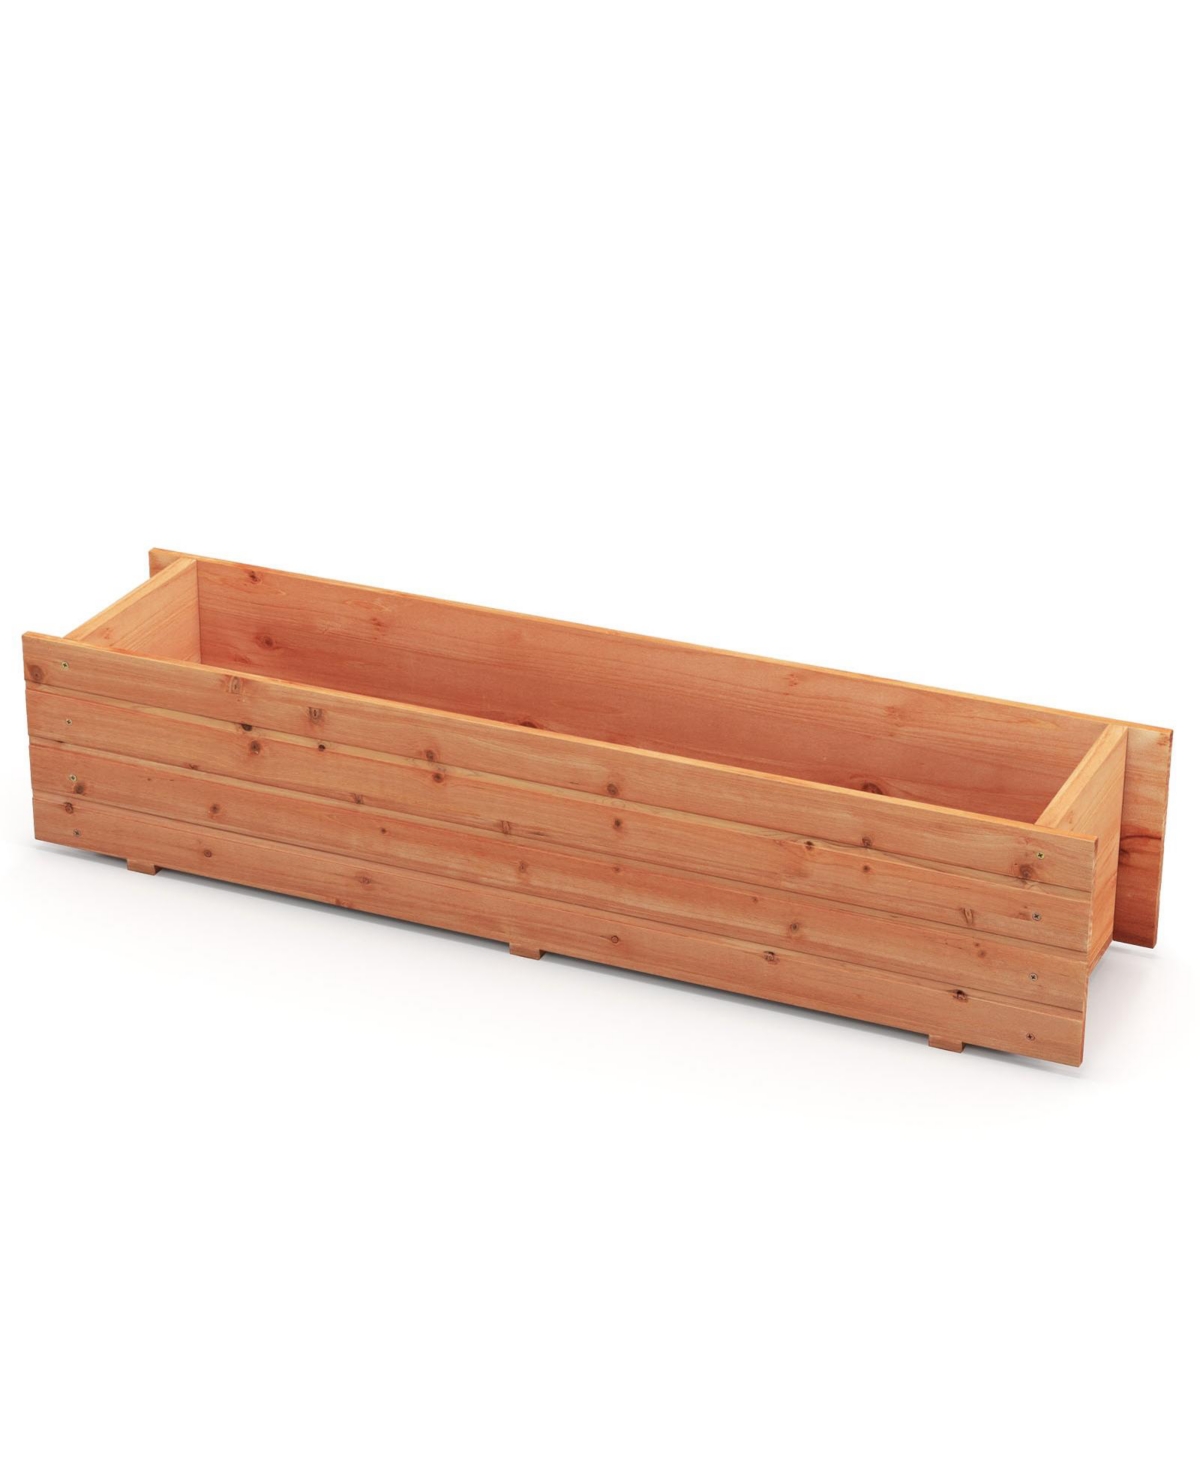 Fir Wood Planter Box with 2 Drainage Holes and 3 Added Bottom Crossbars - Natural